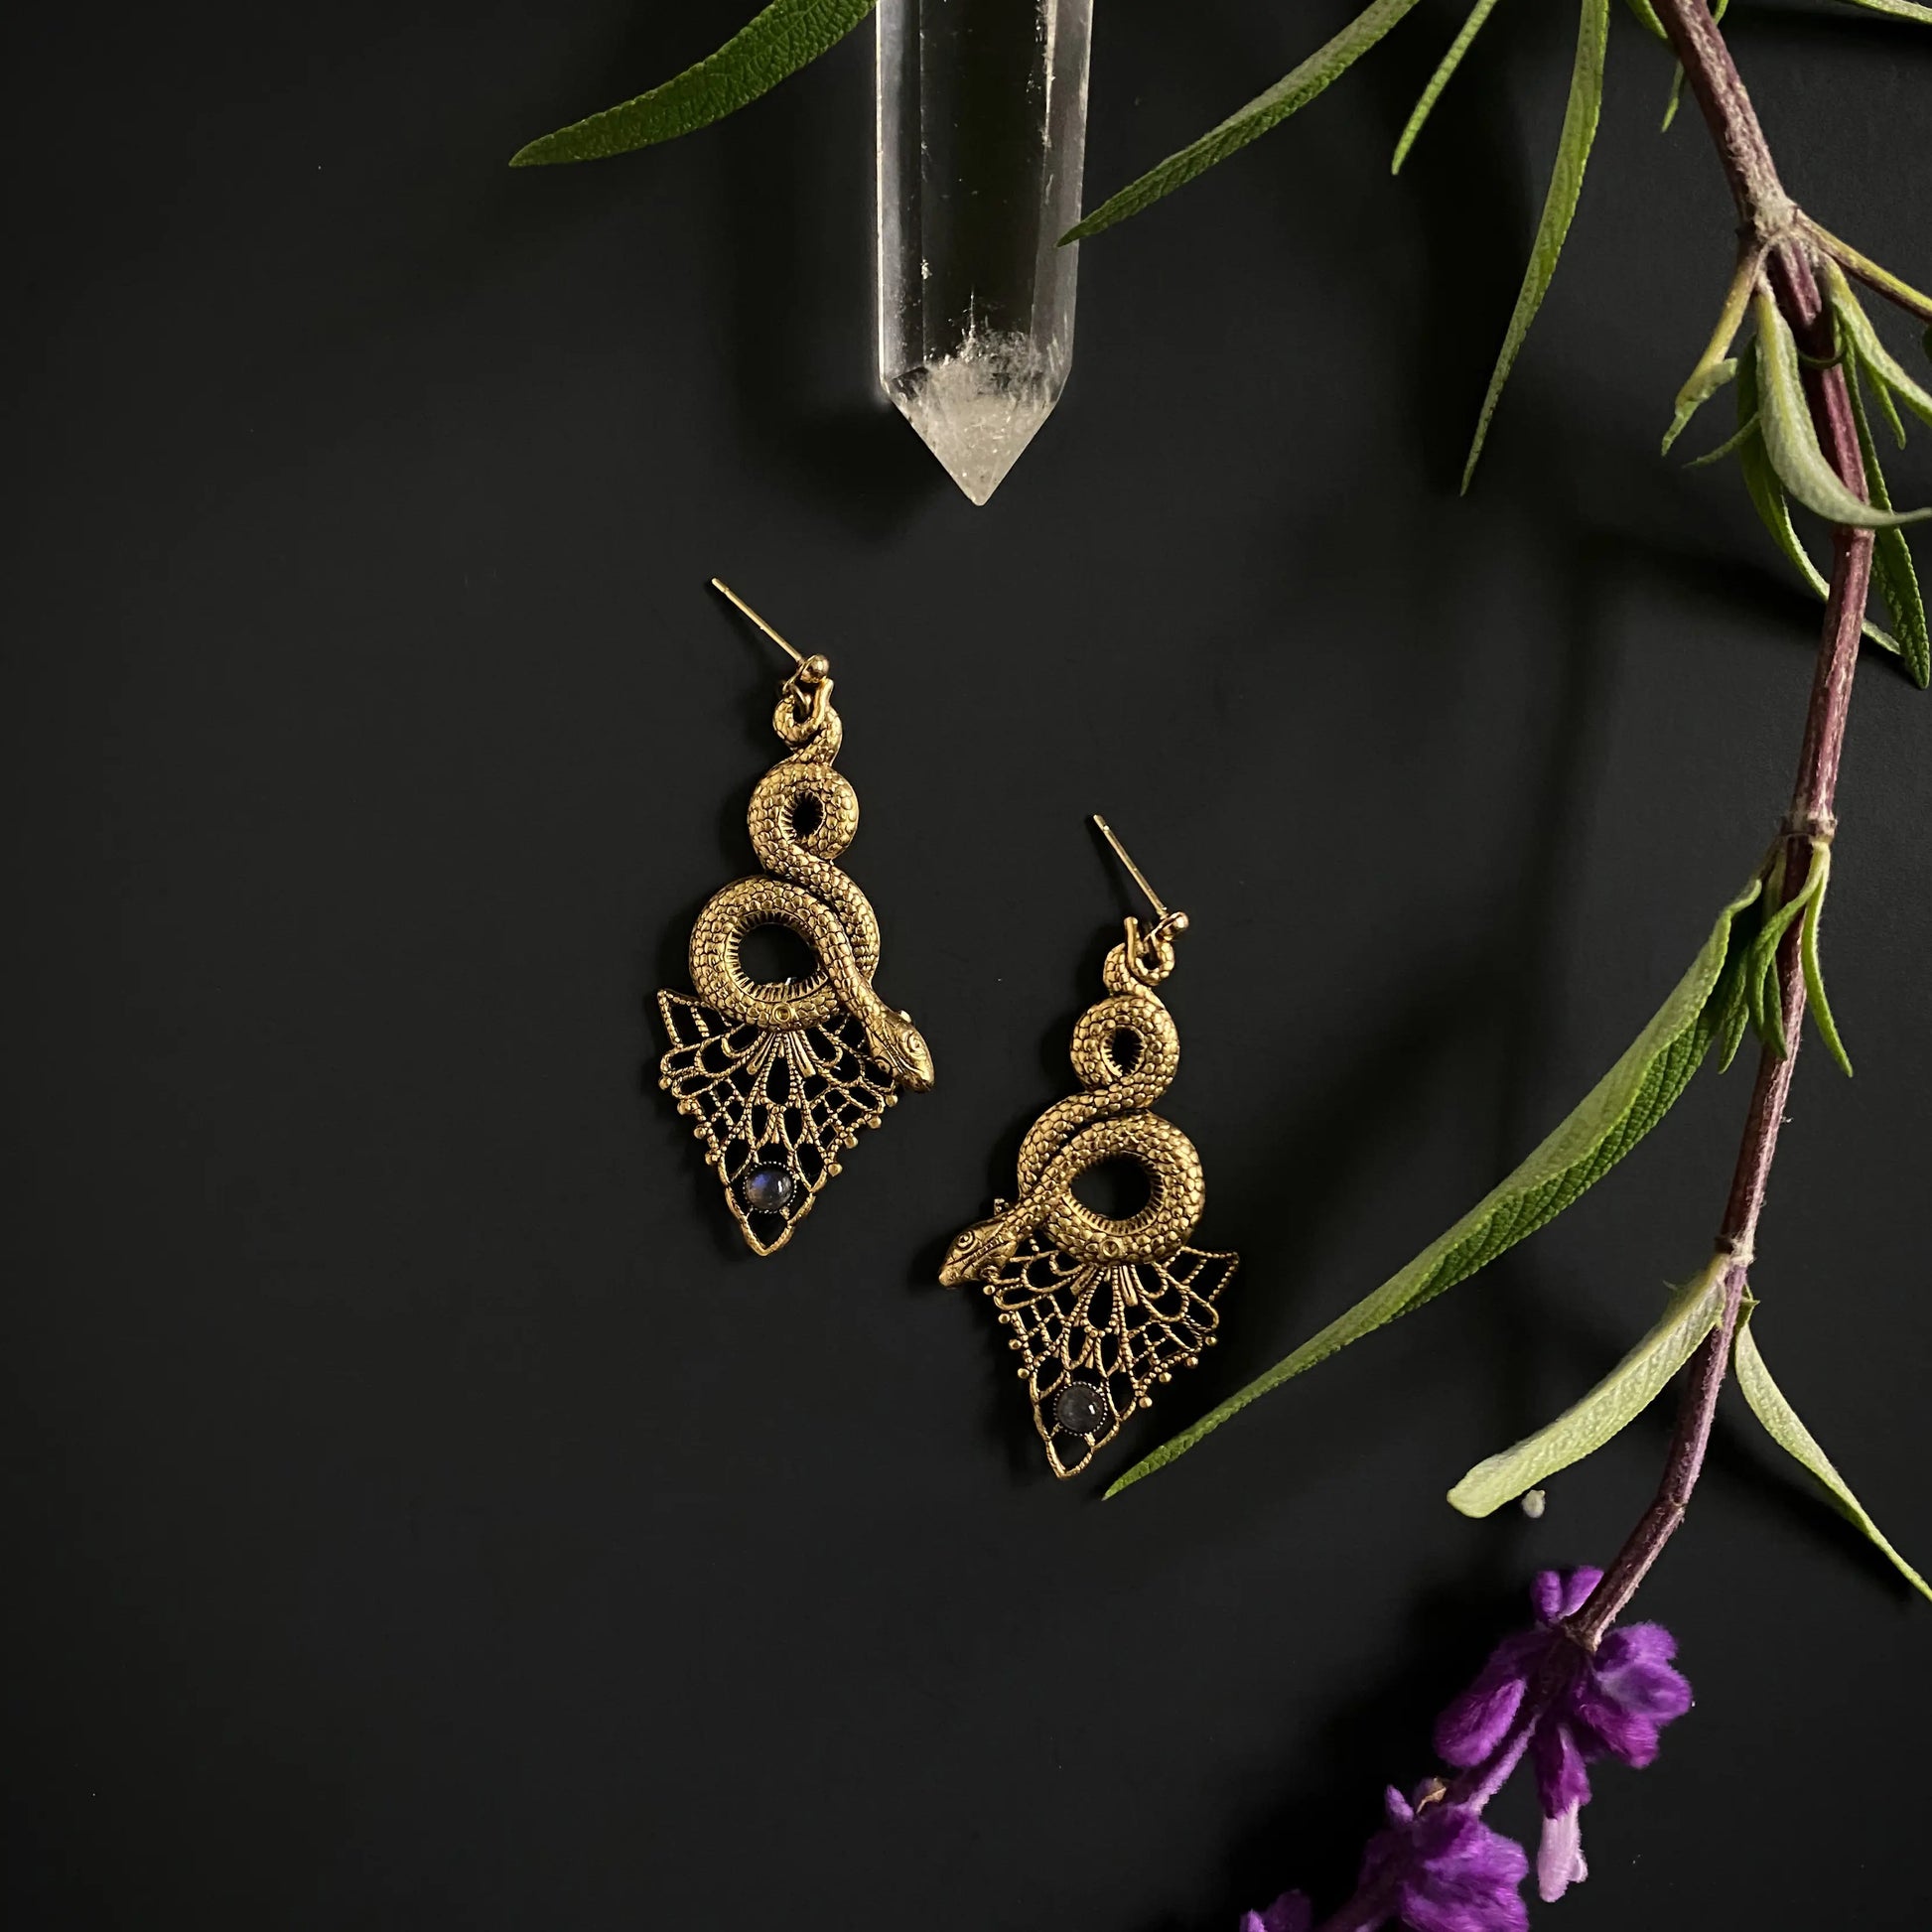 Slithery Scale Earrings - Spellbound